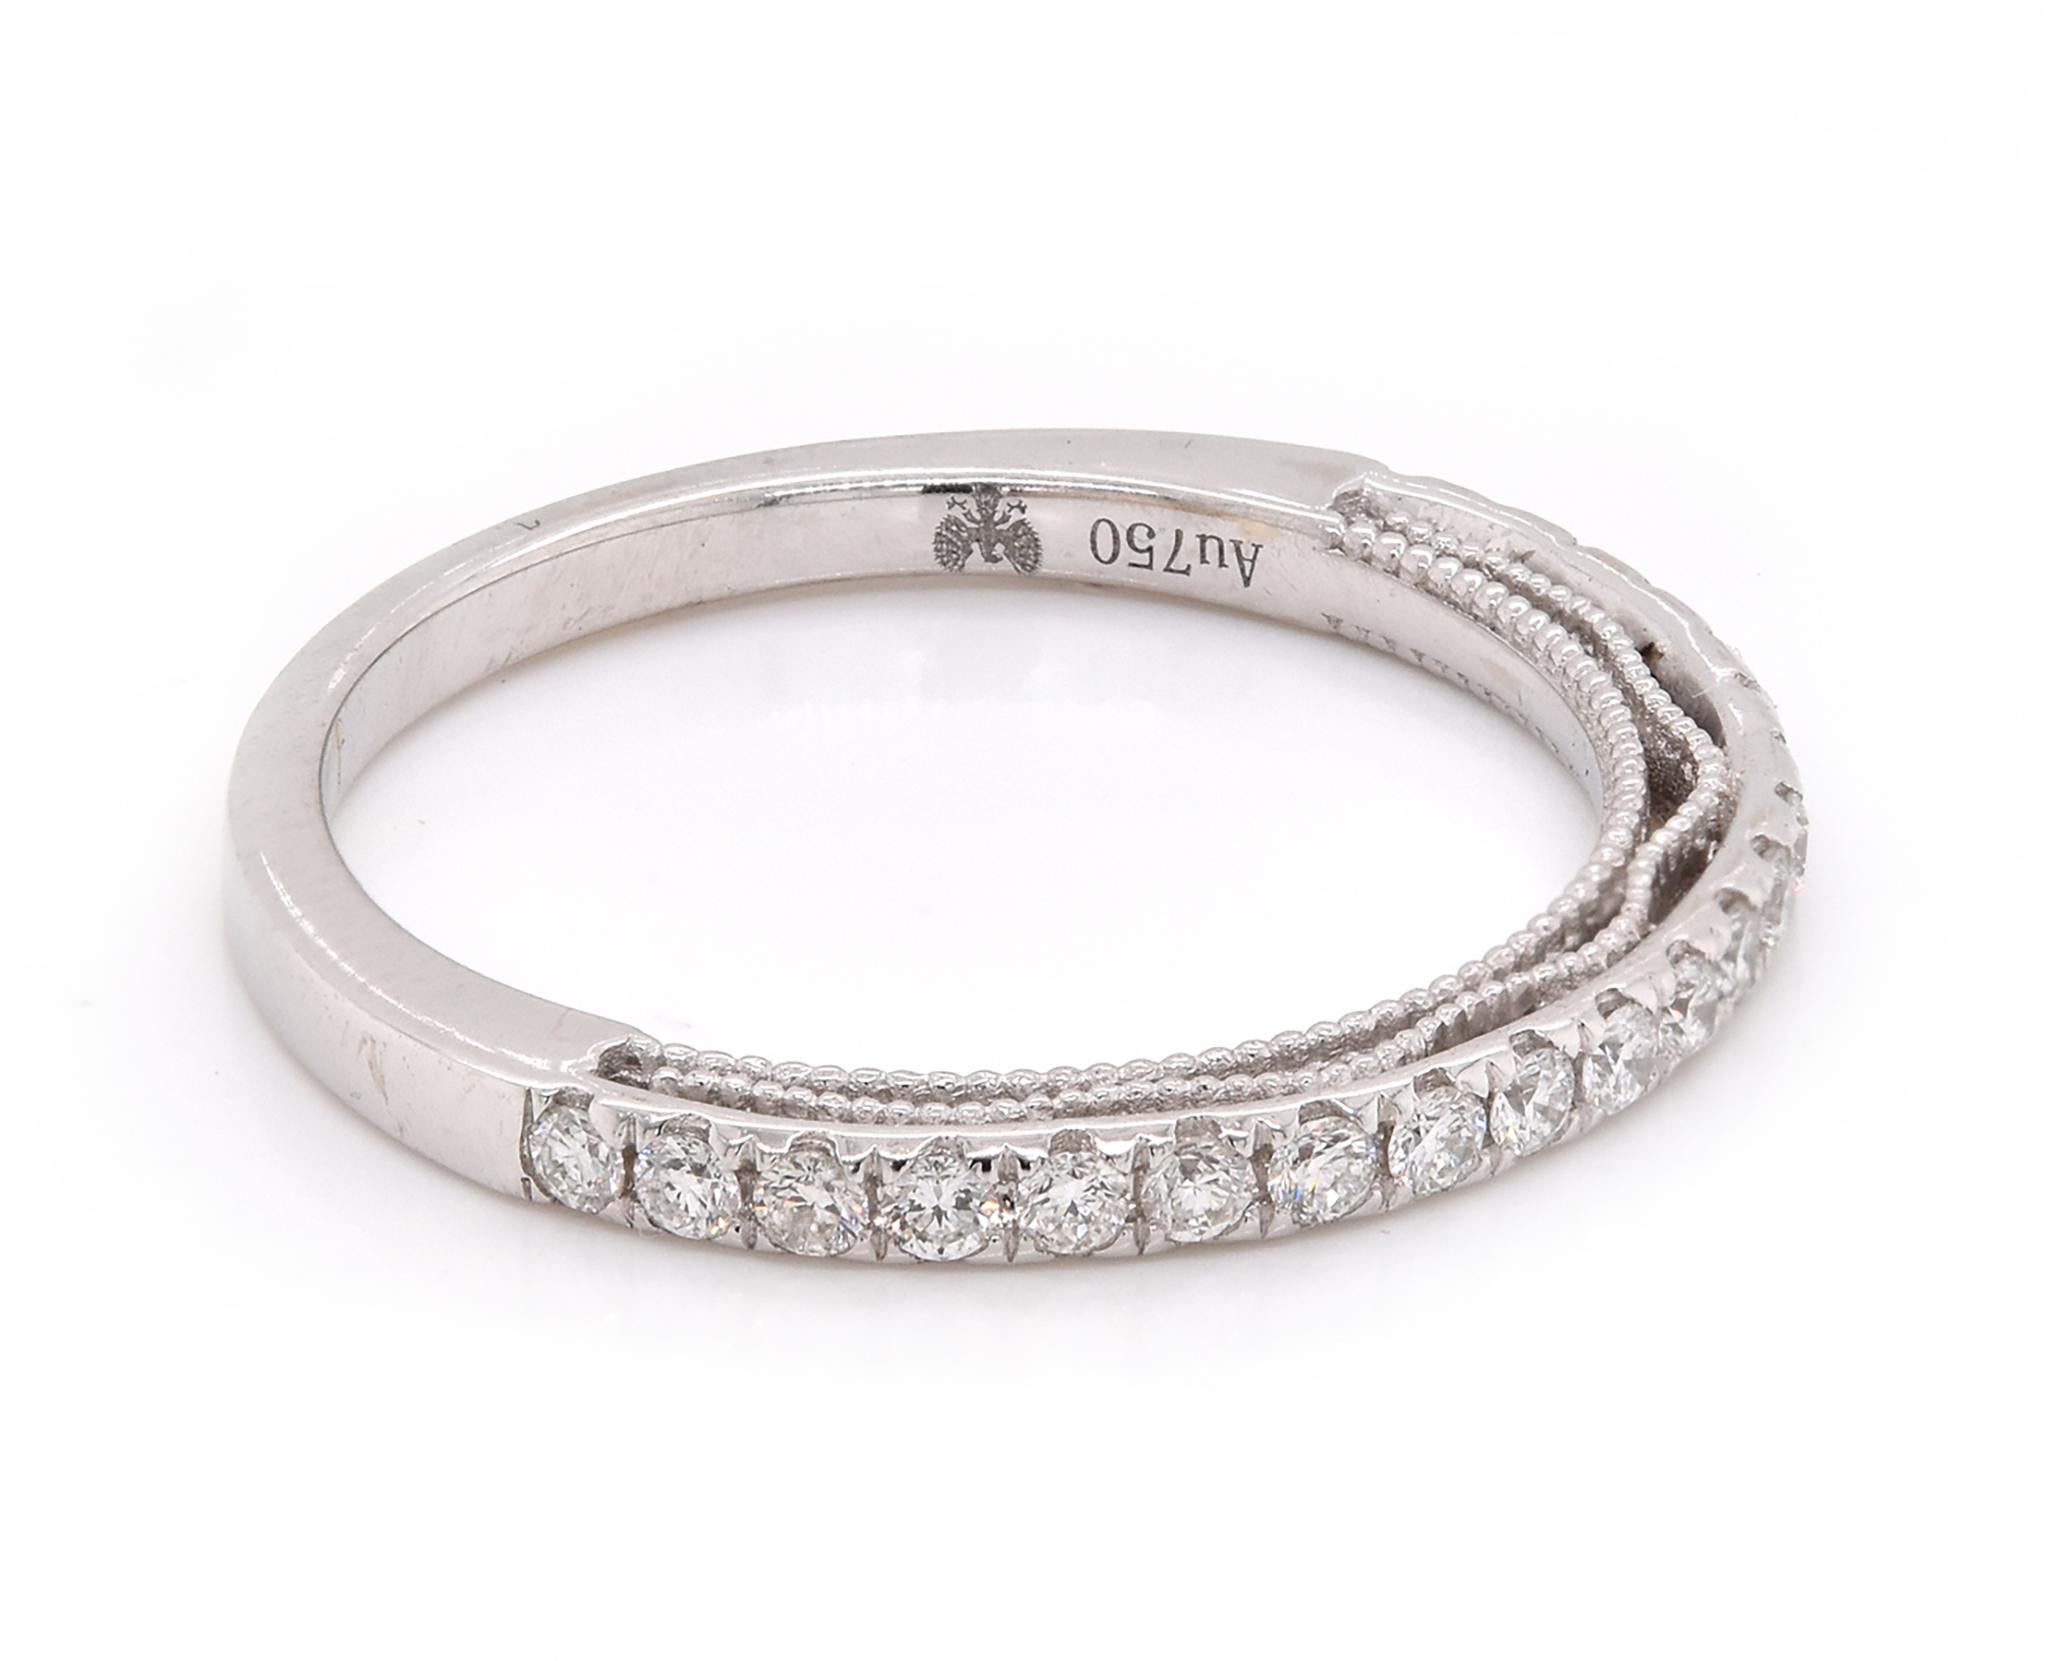 Designer: Custom
Material: 18K white gold
Diamonds: 21 round cut = .52cttw
Color: G
Clarity: VS
Size: 7
Dimensions: ring measures 1.8mm in width
Weight: 2.39 grams
